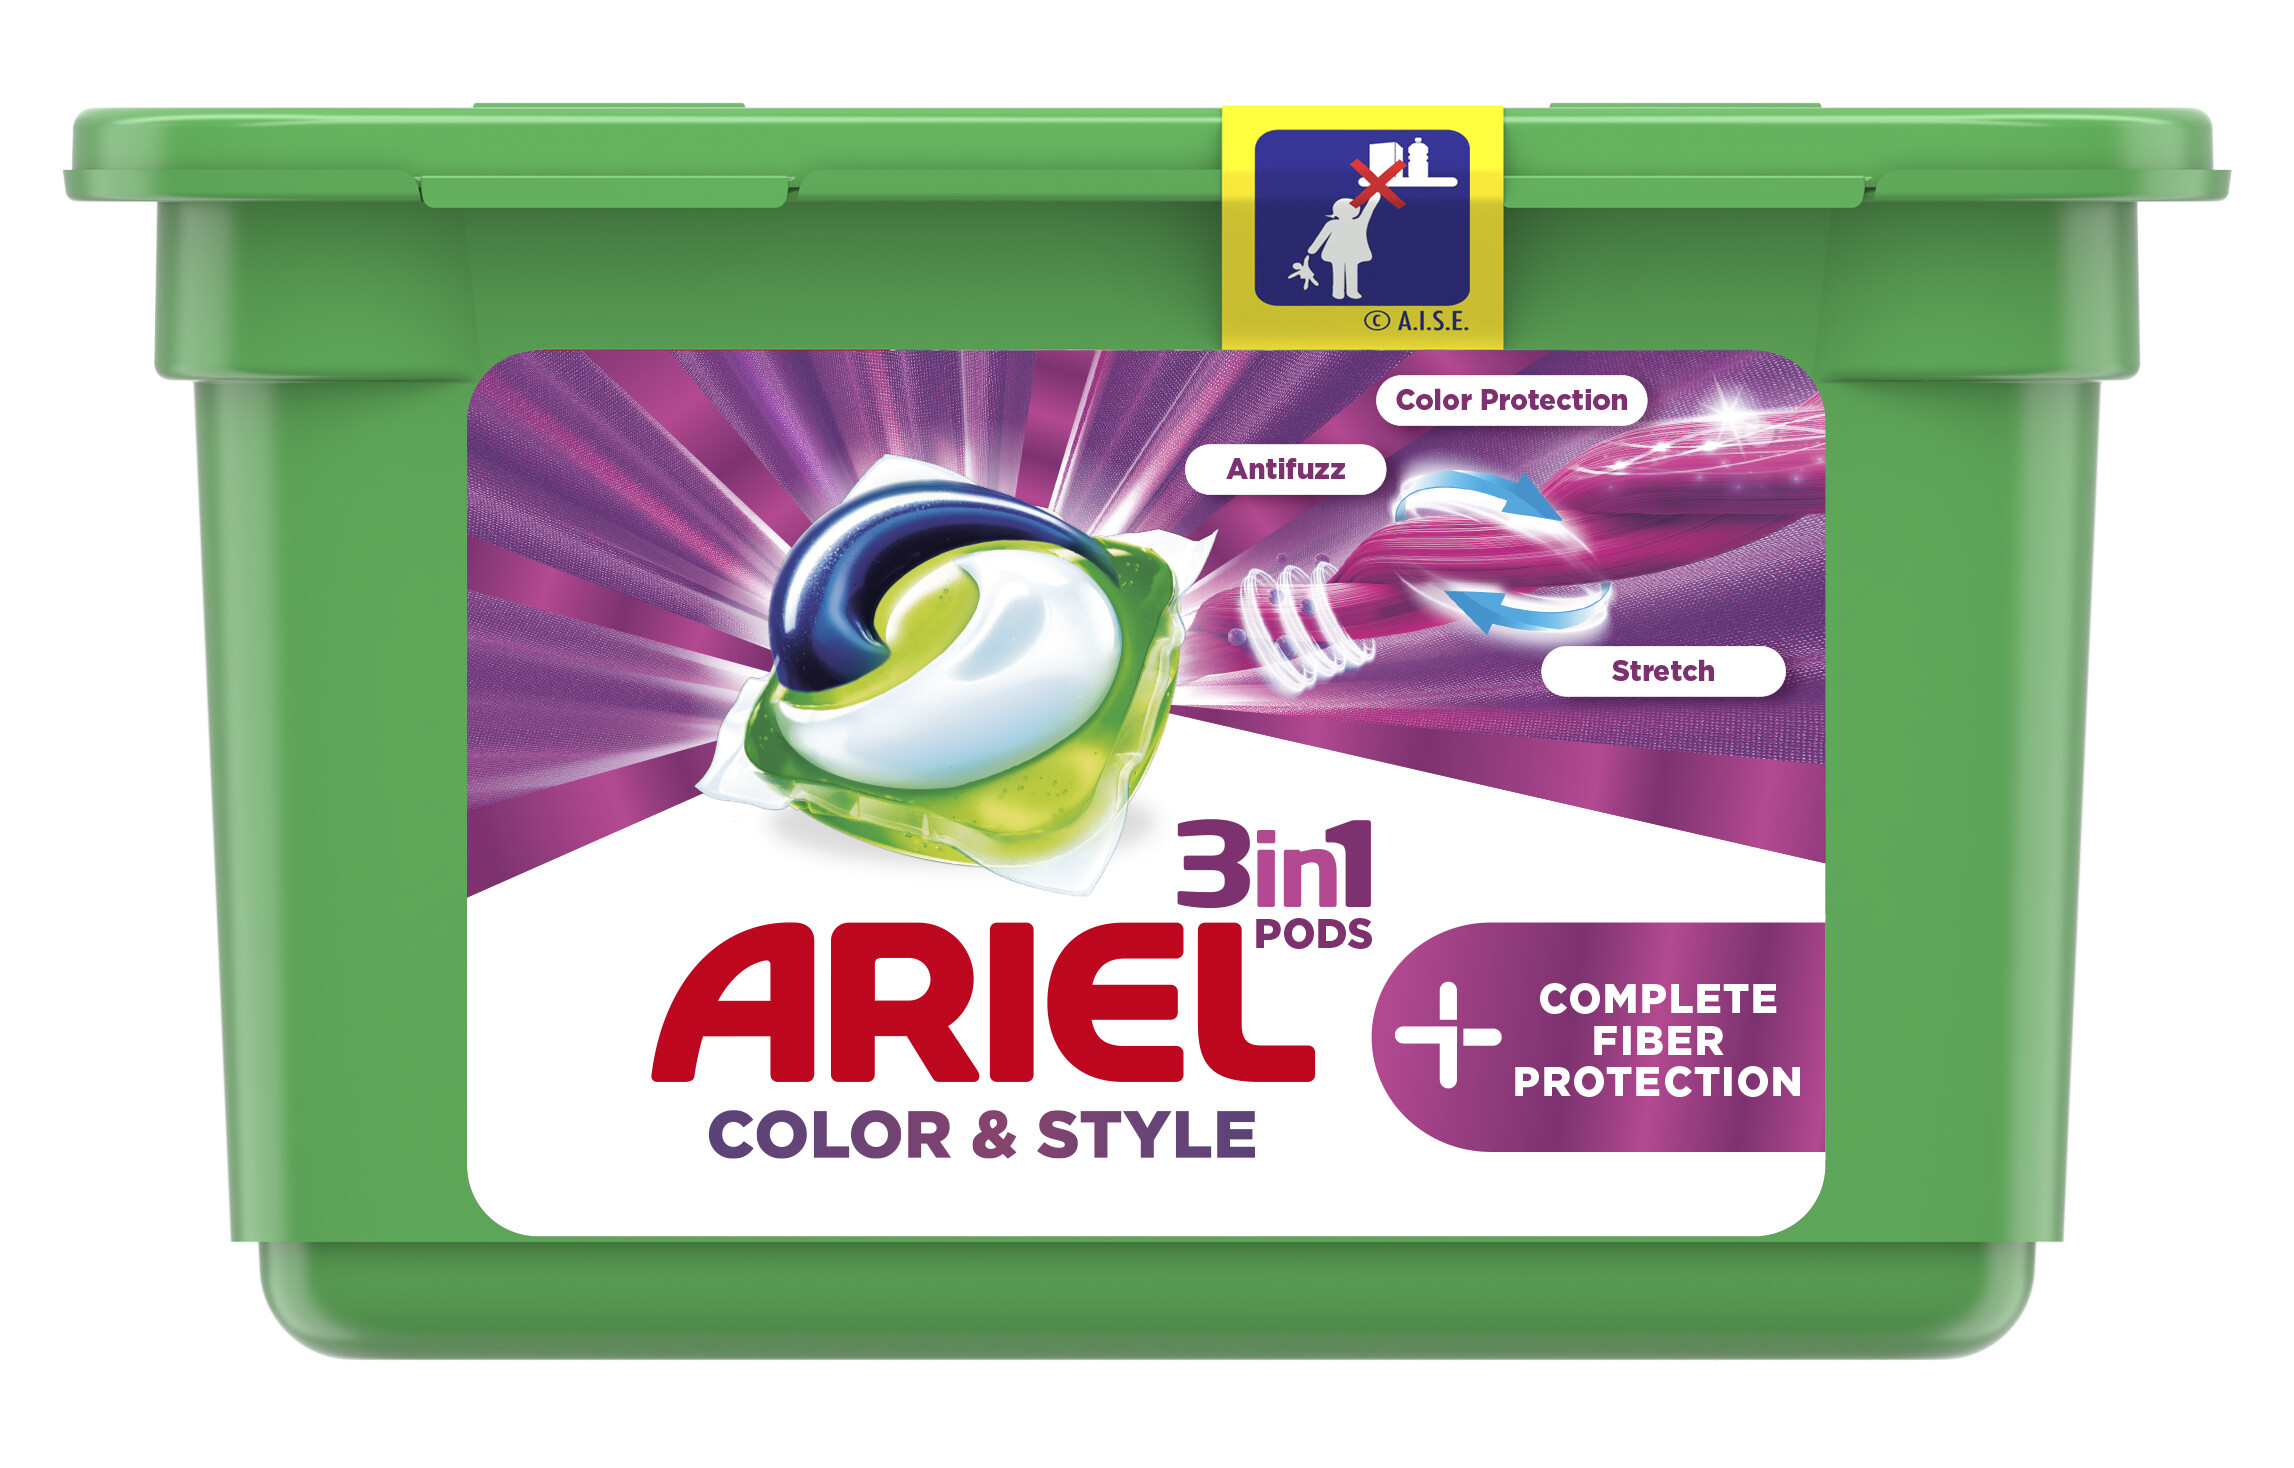 Longer and smoother clothes with Ariel's new laundry capsules